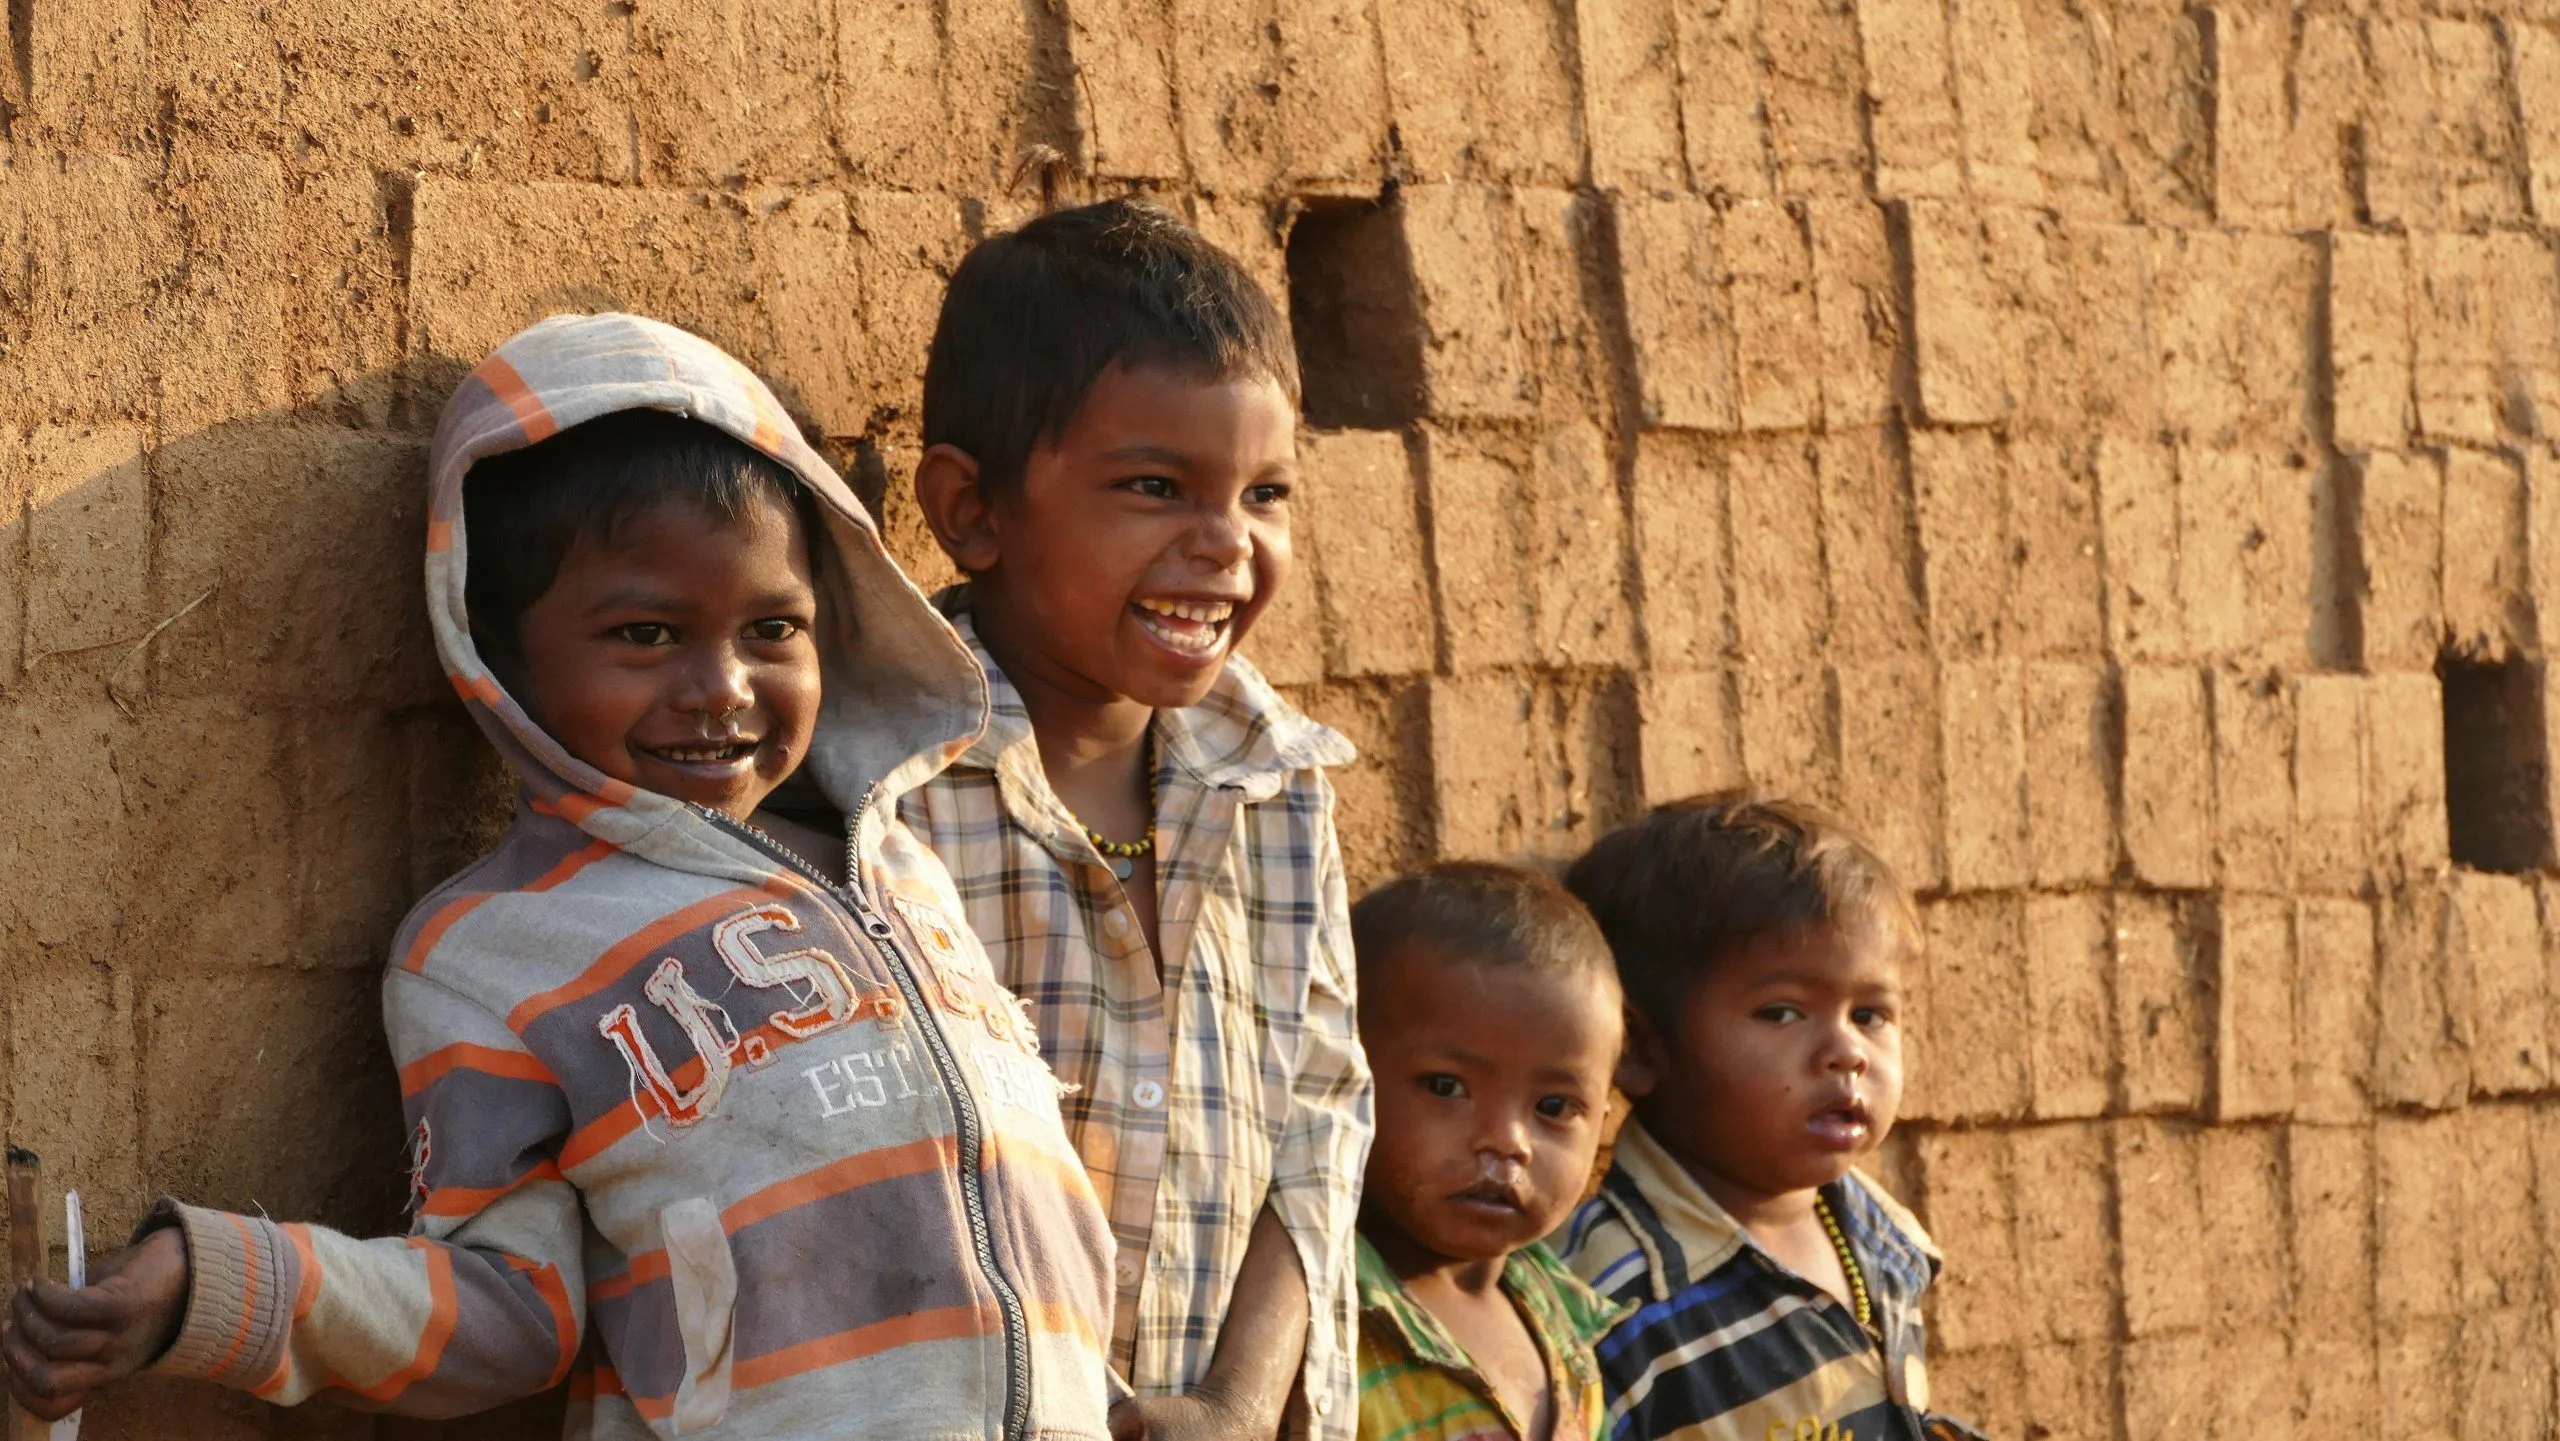 Young children laughing next to a brick kiln in Sonale, India